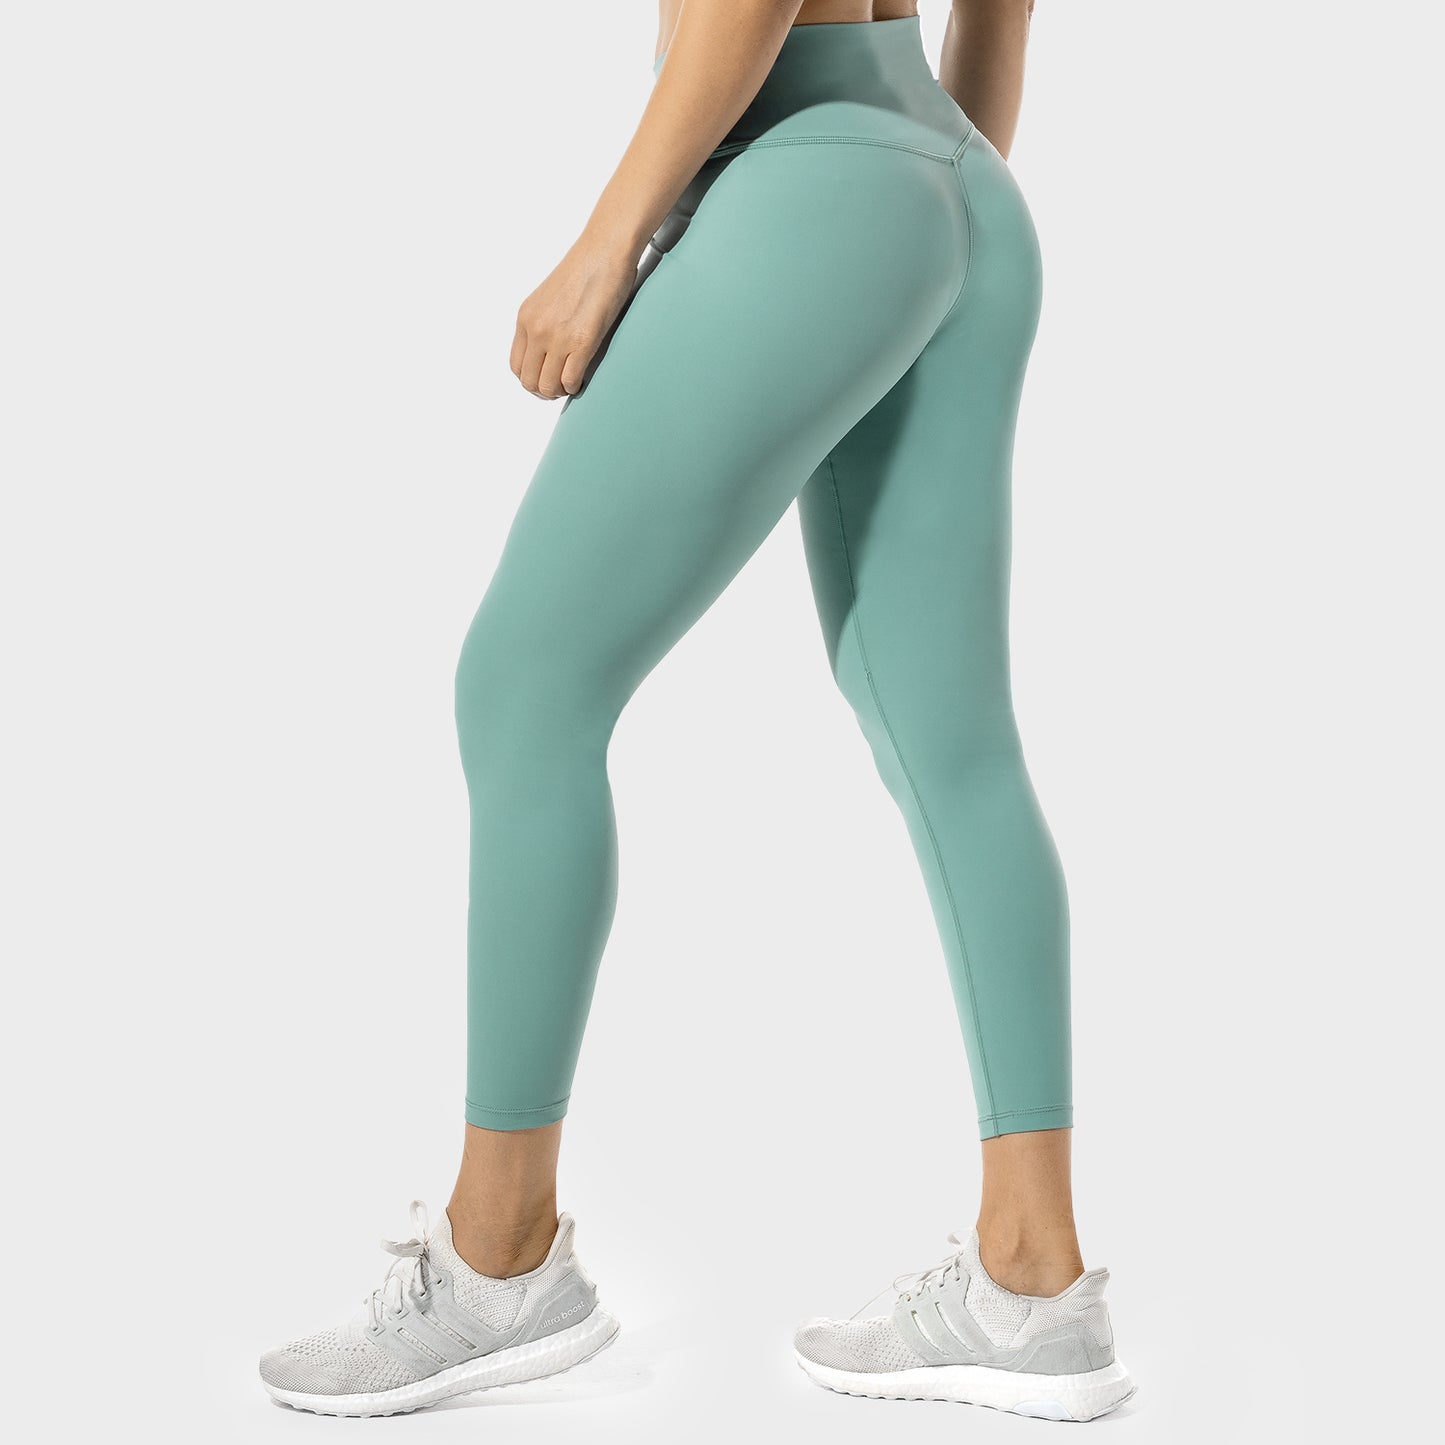 squatwolf-workout-clothes-womens-fitness-7-8-leggings-blue-gym-leggings-for-women